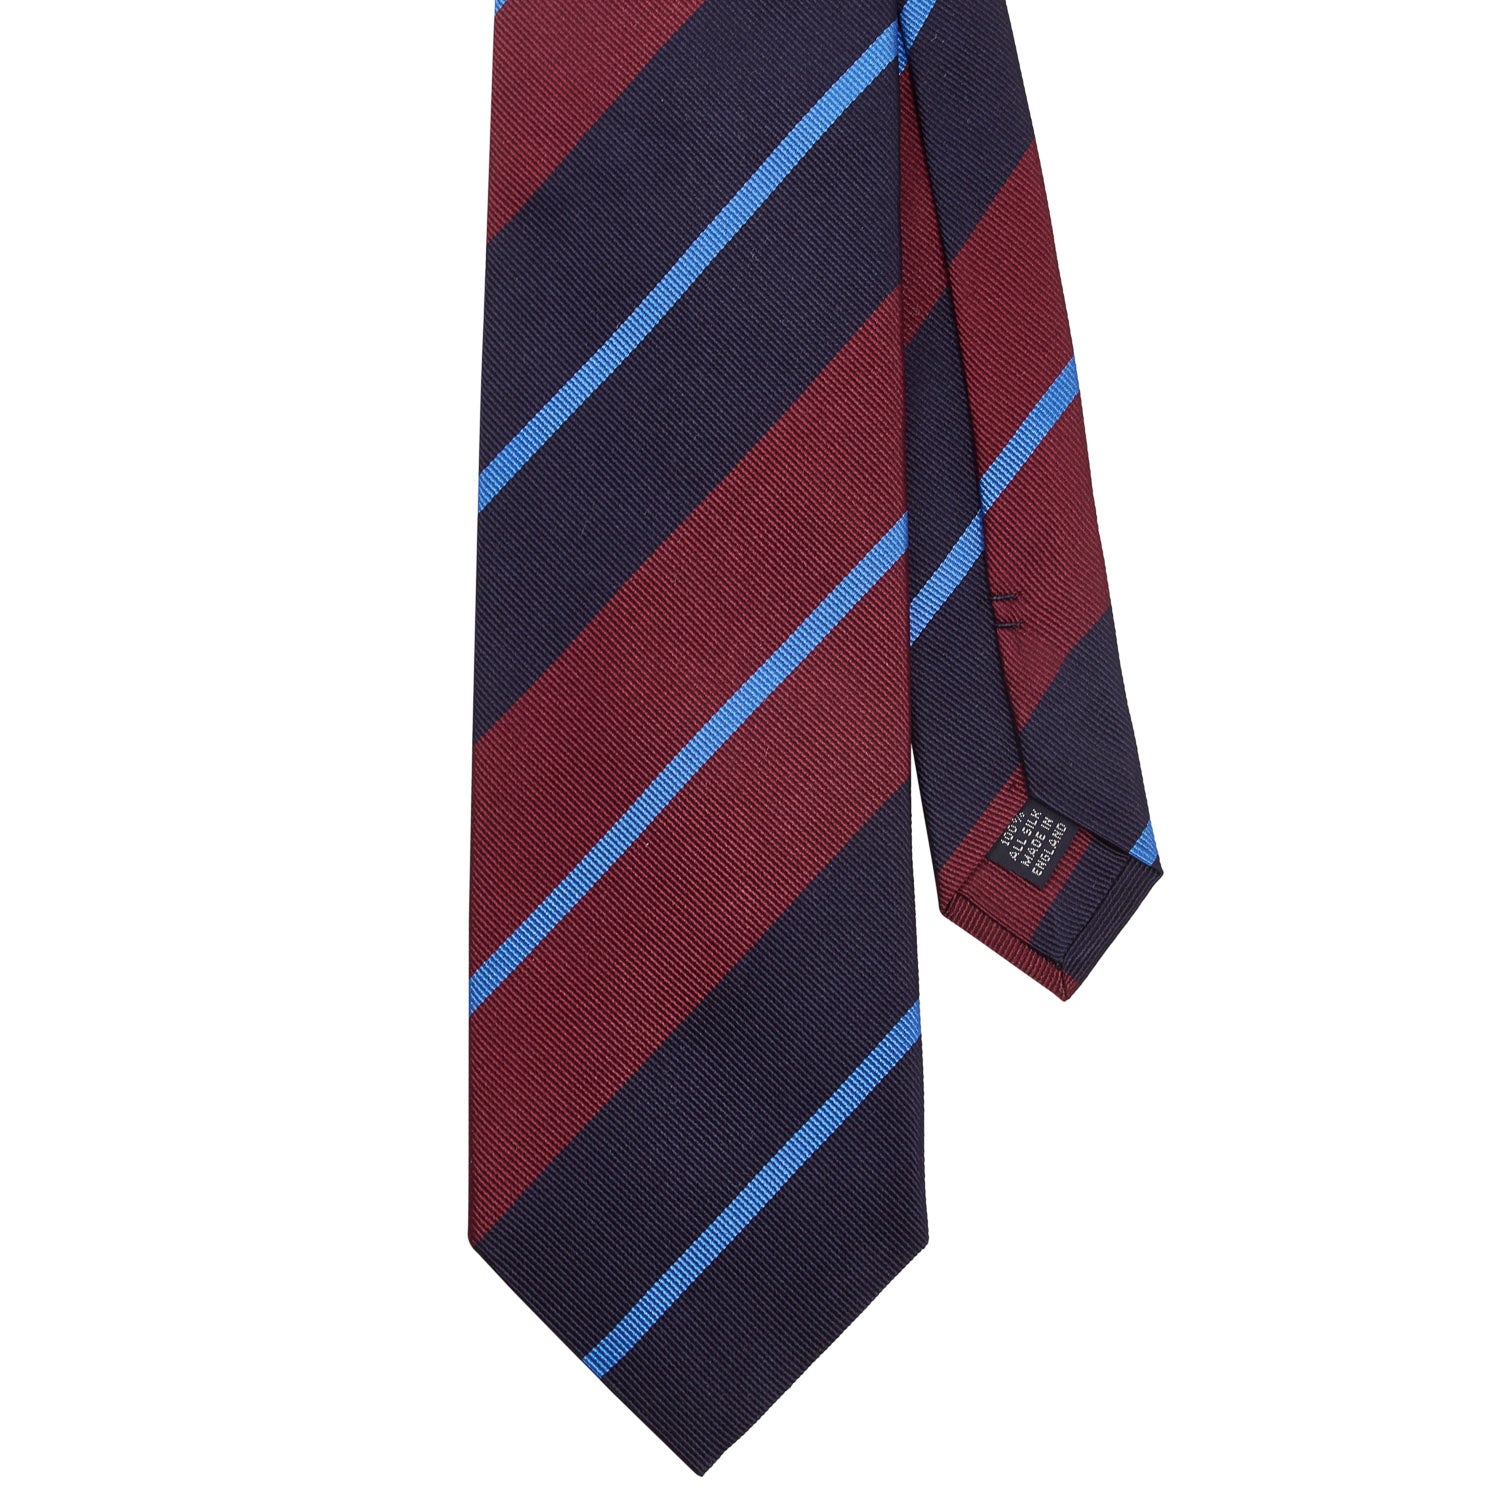 A Sovereign Grade Navy/Burgundy Rep Tie from KirbyAllison.com, a high-quality handmade tie with blue and red stripes on a white background, perfect for the United Kingdom.